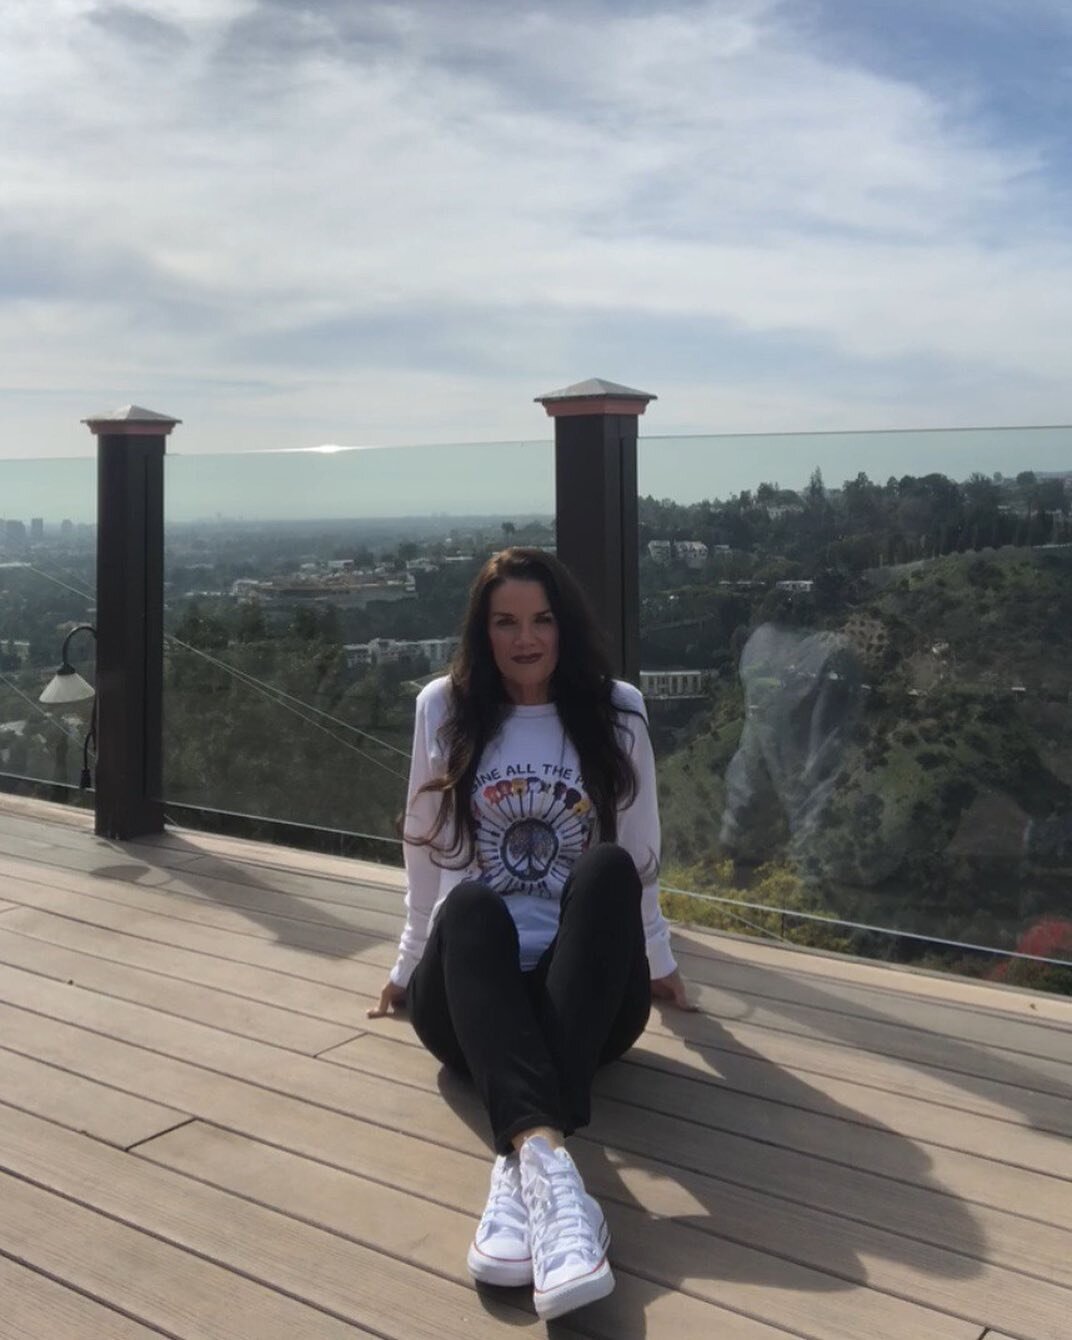 Los Angeles has the most beautiful views😊 🤗